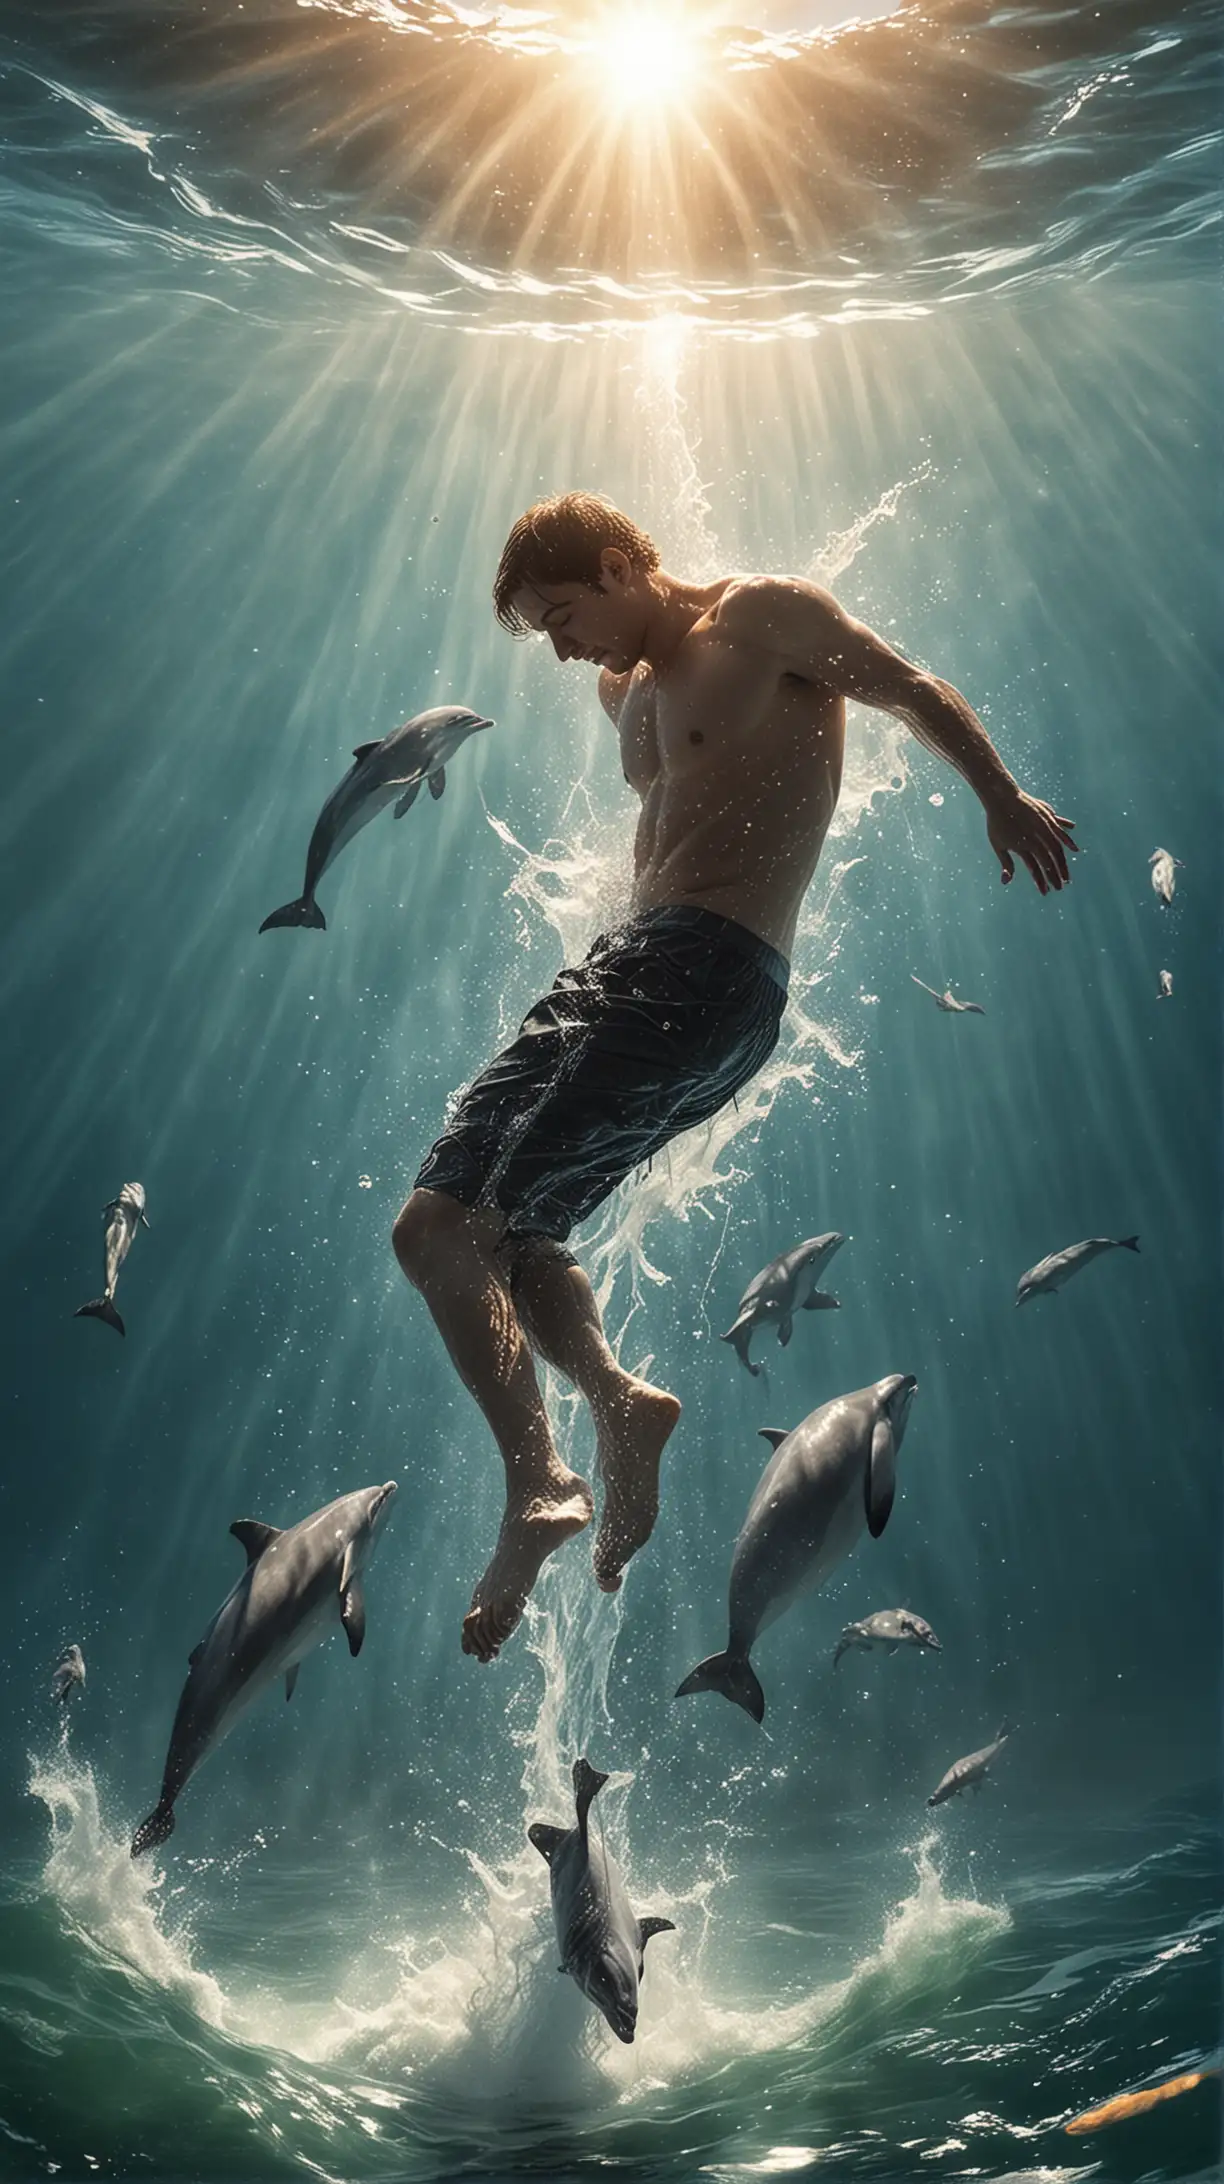 Person Falling into Water with Sunlight and Surrounding Fish